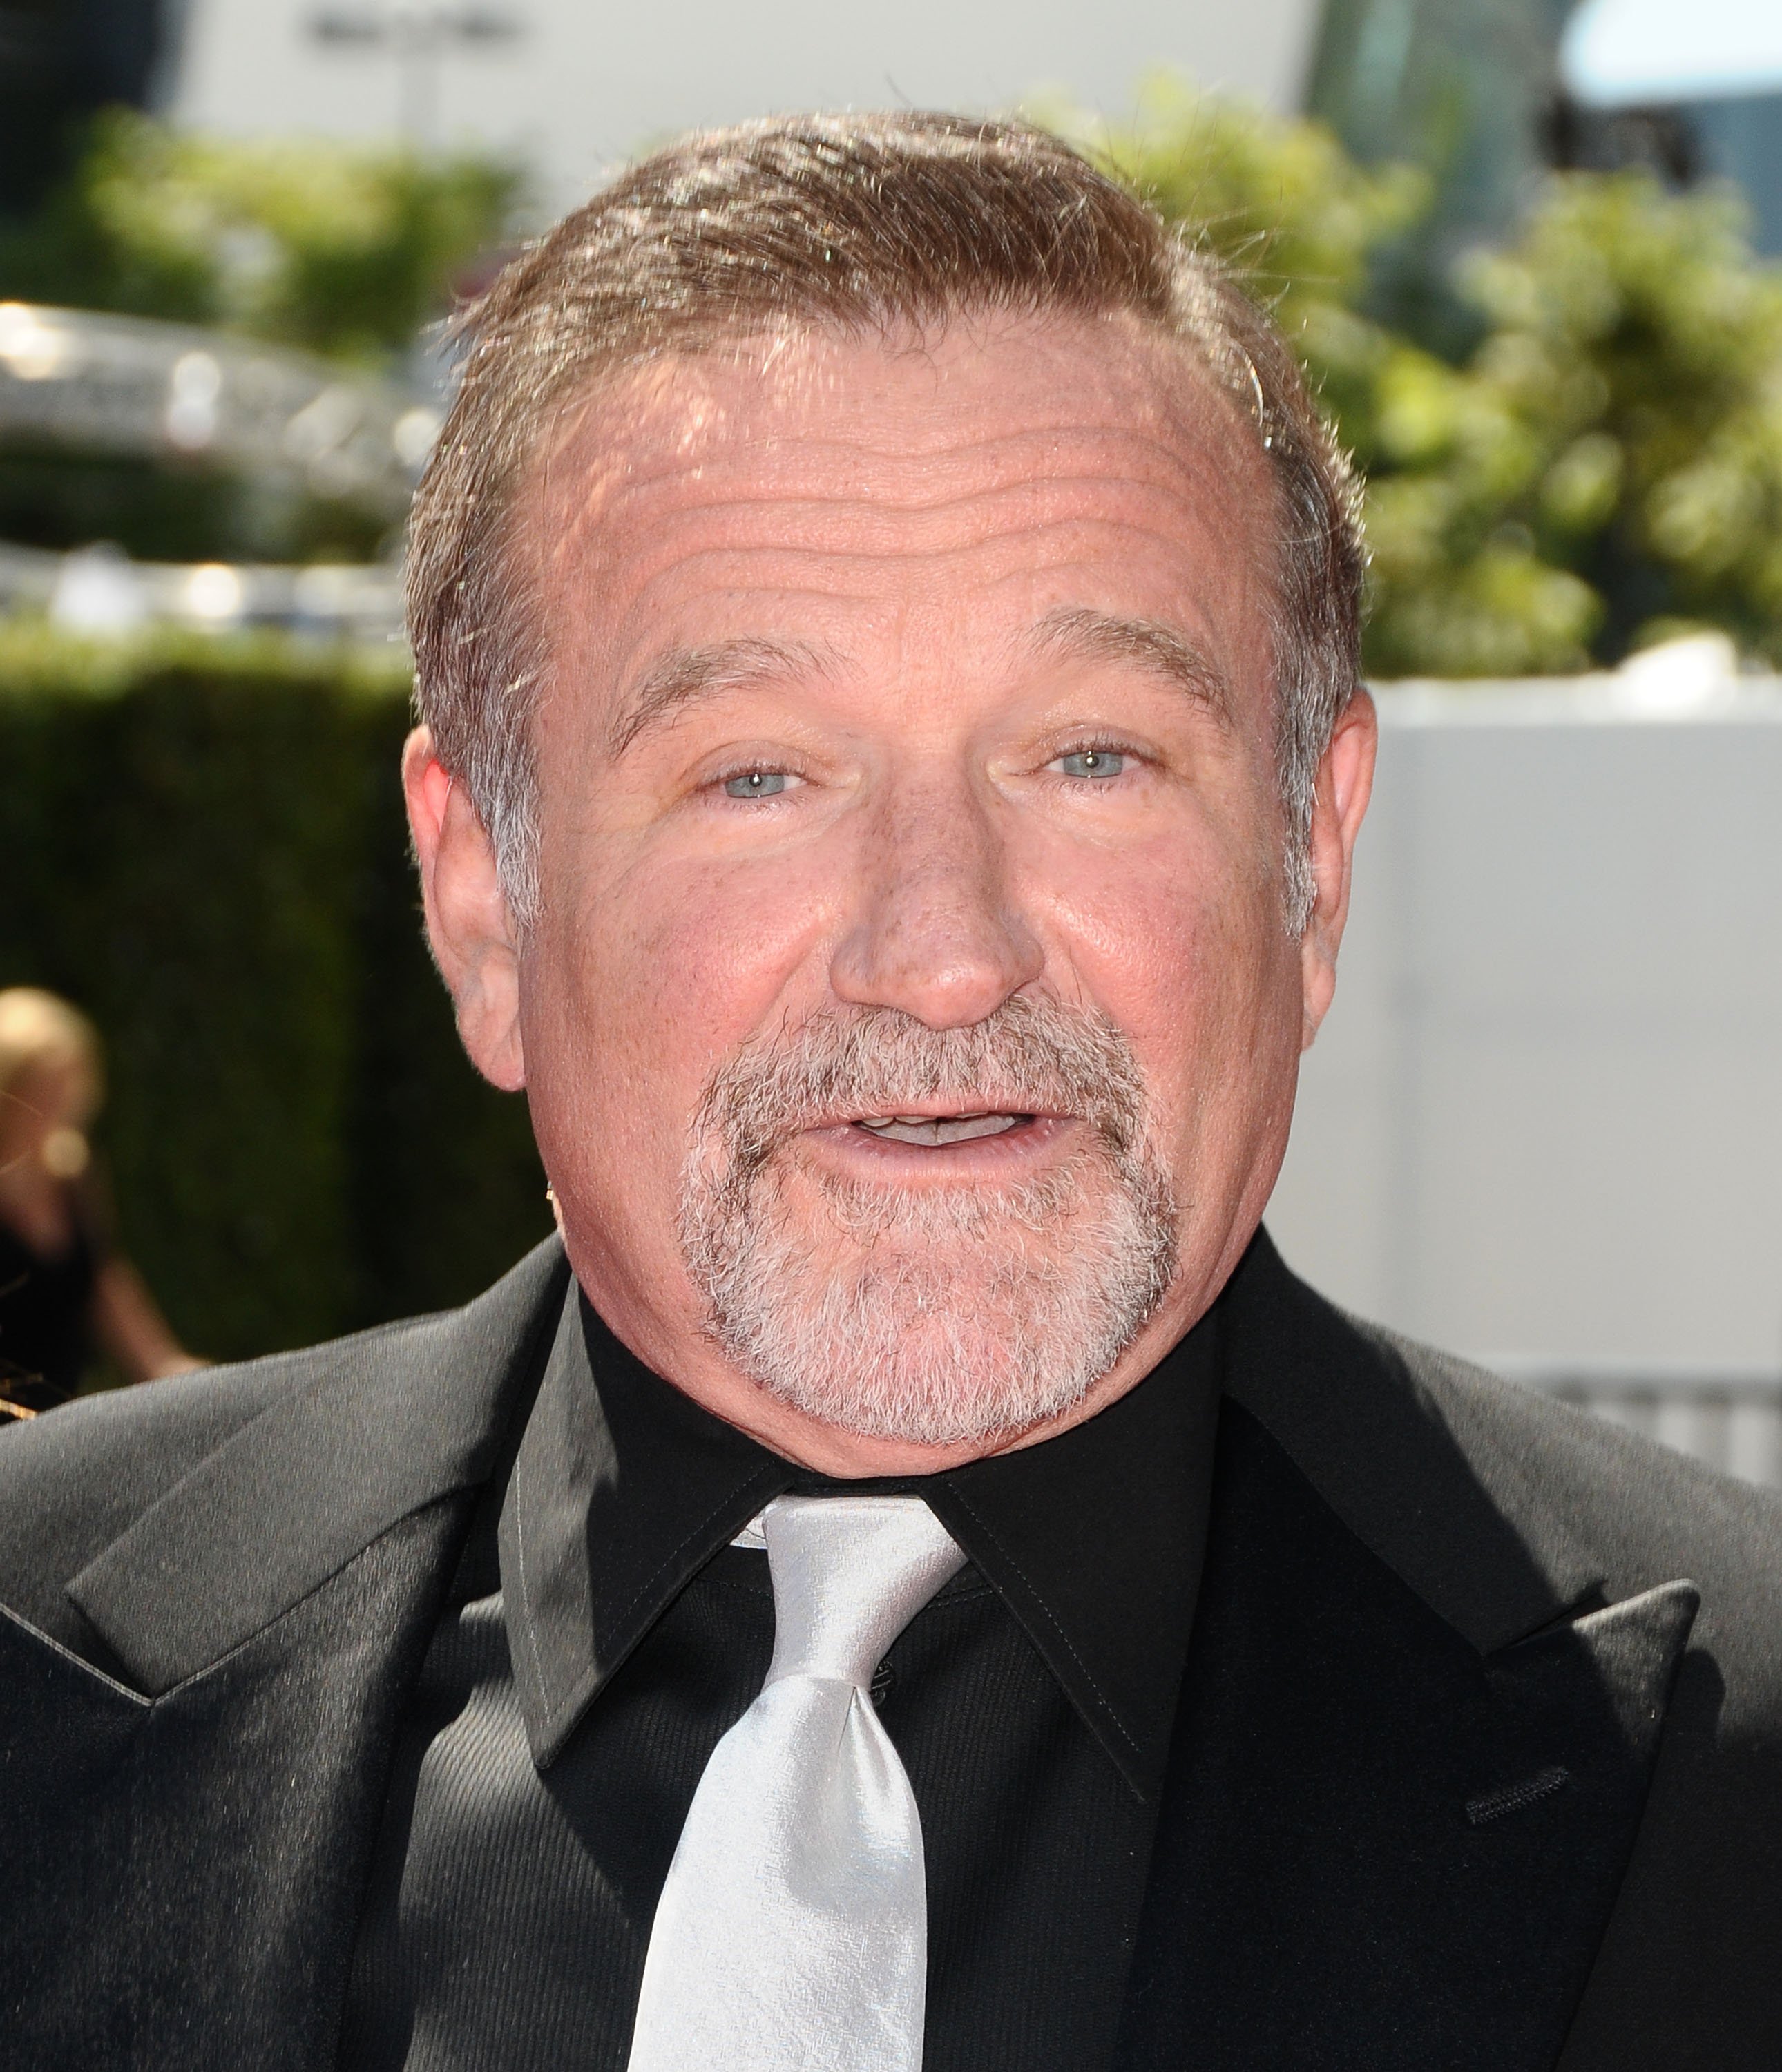 Robin Williams attends the 2010 Creative Arts Emmy Awards at Nokia Plaza L.A. LIVE on August 21, 2010 in Los Angeles, California. | Source: Getty Images